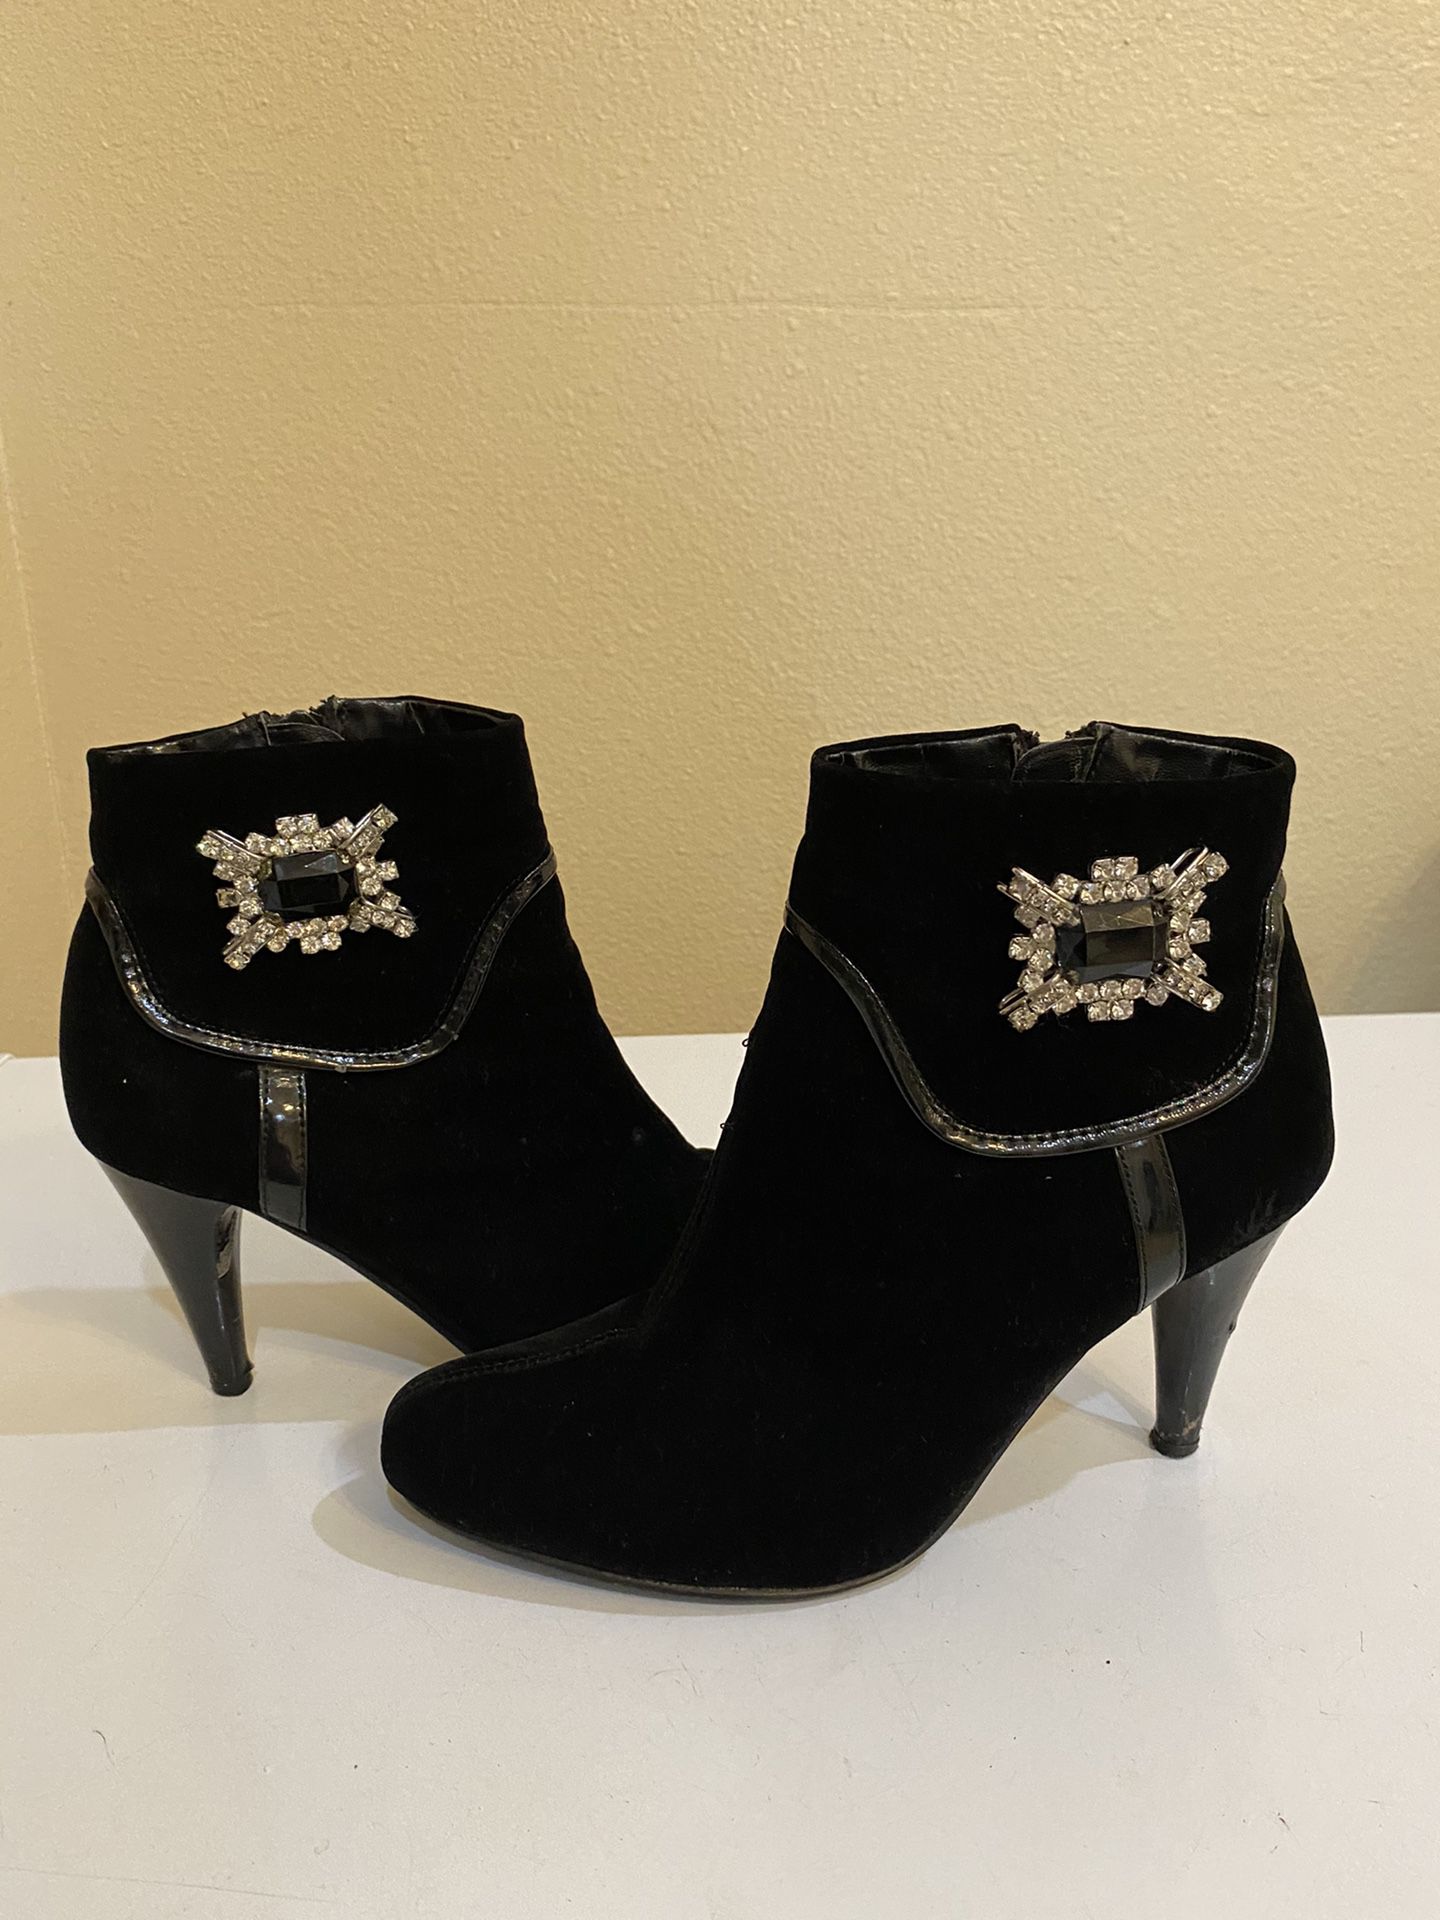 Ladies Sz 8M Ankle Boot W/side Broche 